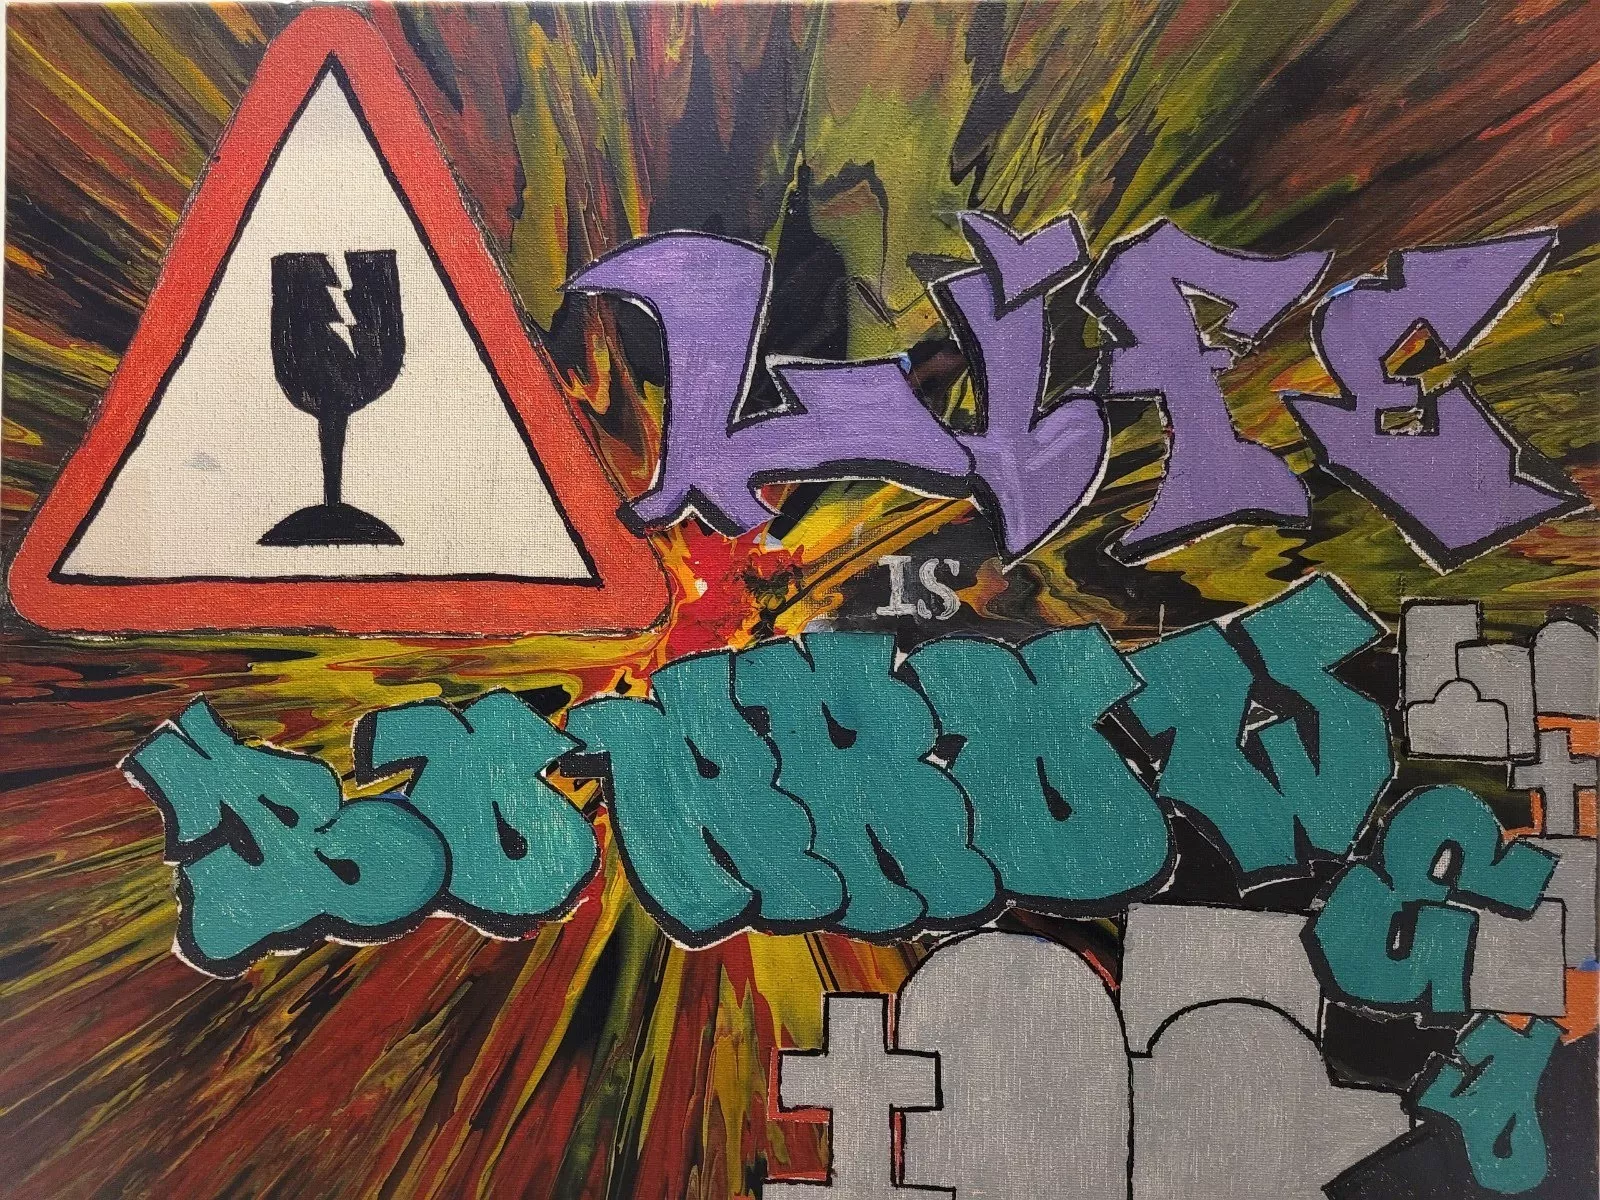 A red triangle with a white interior frames the black silhouette of a basic wine glass shape that has a jagged lightning bolt as is a piece missing.  “Life” is written in a jagged purple graffiti-style on the right side of the triangle.  Beneath that is the word "is" in white stencil type.  Below that is the word "BORROWED" in a rounded blue graffiti-style script.